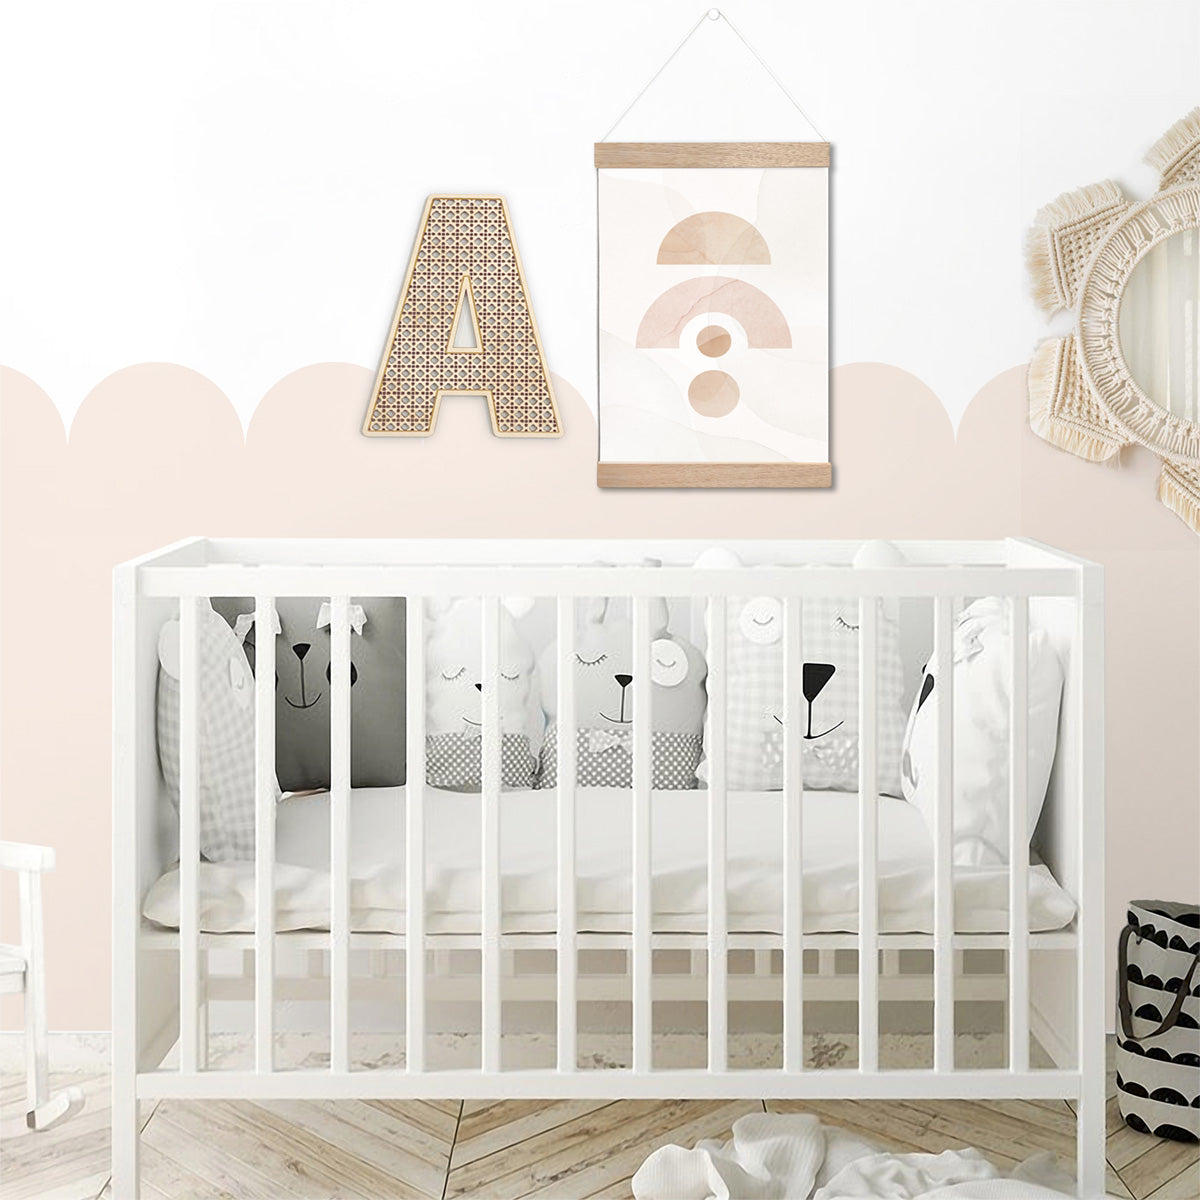 Rattan Single Letter on Display in Baby Nursery Above Crib